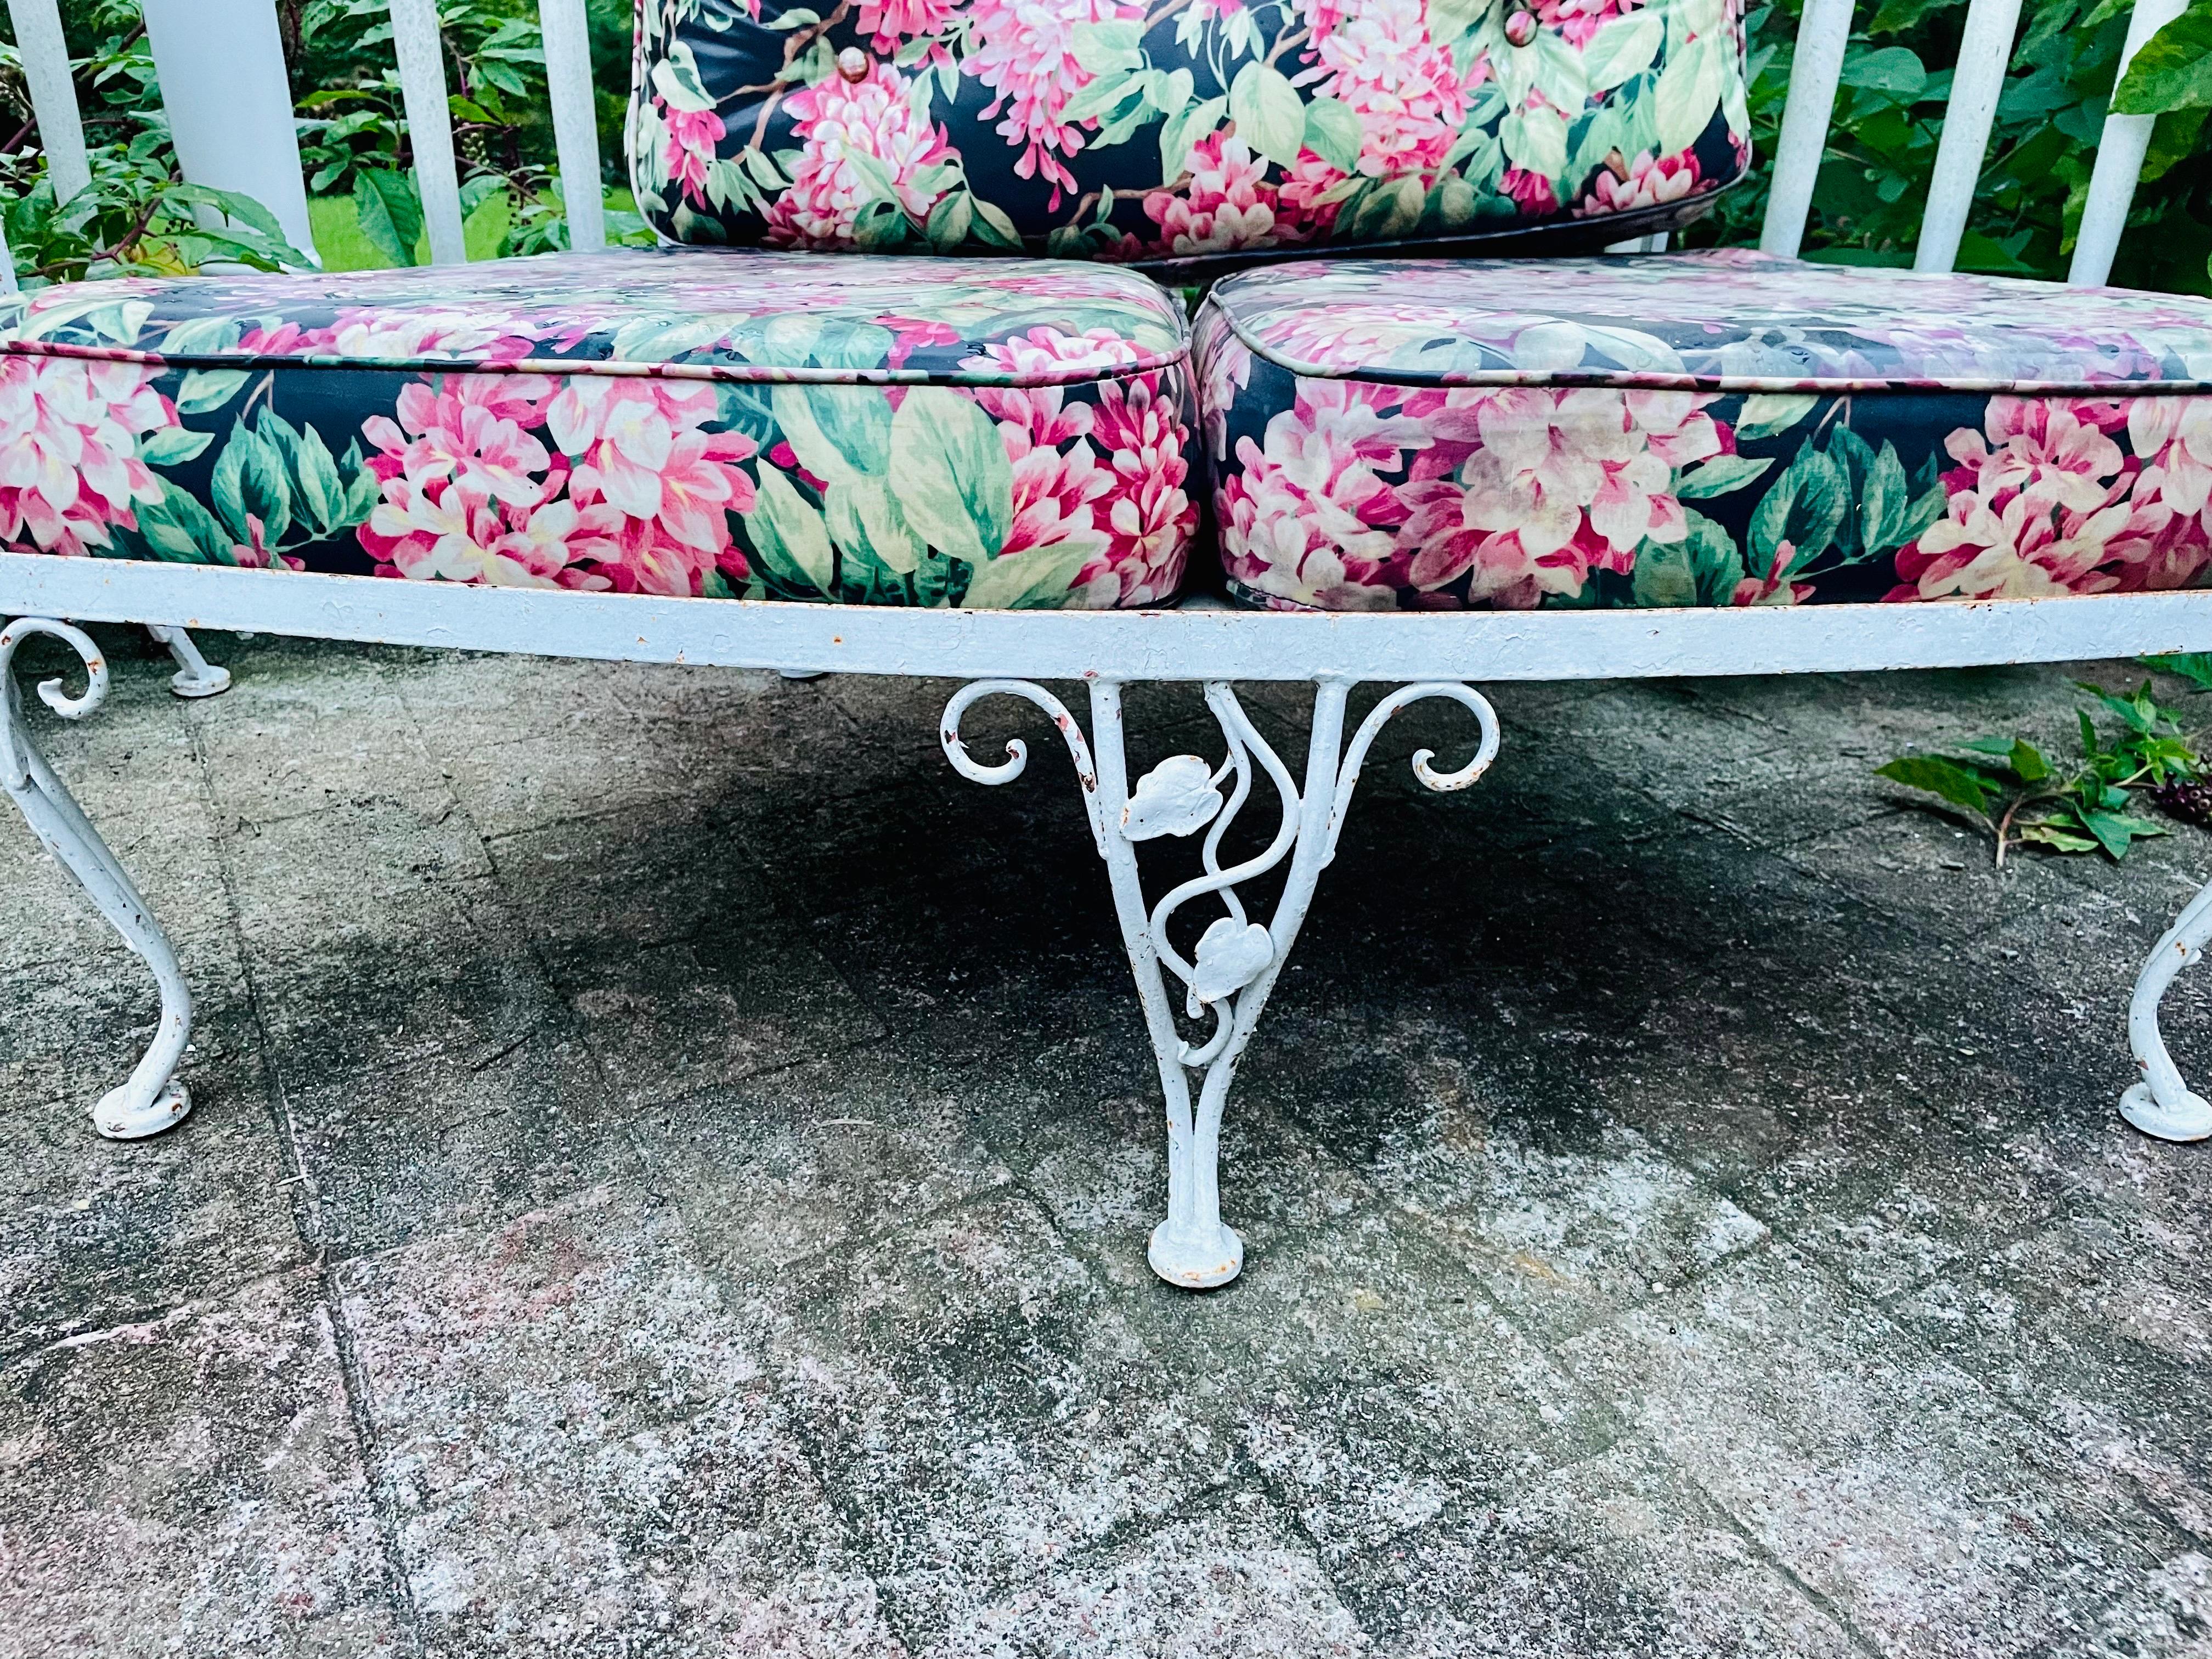 Vintage Woodard Wrought Iron Furniture Curved Sectional Chantilly Rose

Add to your existing sectional or start your complete set of Vintage Wrought Iron patio furniture by Woodard in the highly desirable and most sought after pattern, “Chantilly